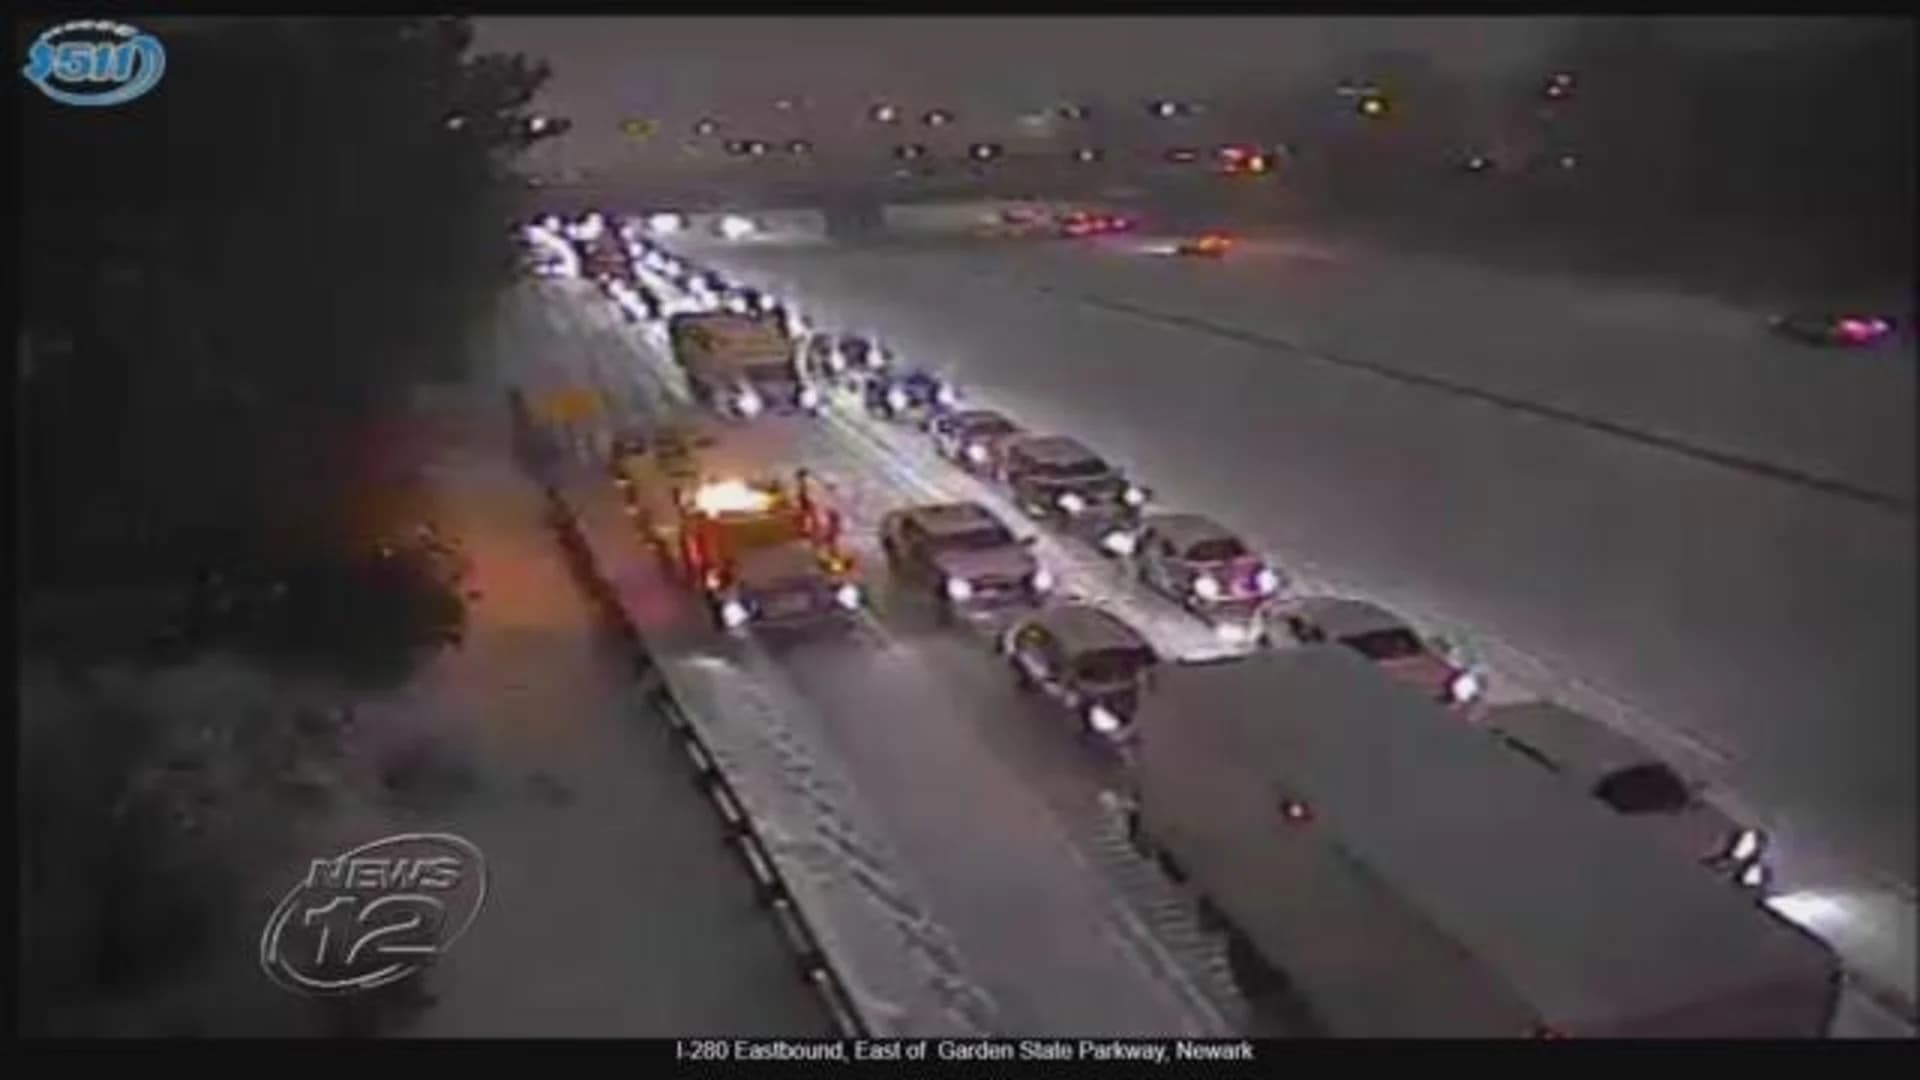 Absolute chaos: Snowstorm causes gridlock around New Jersey